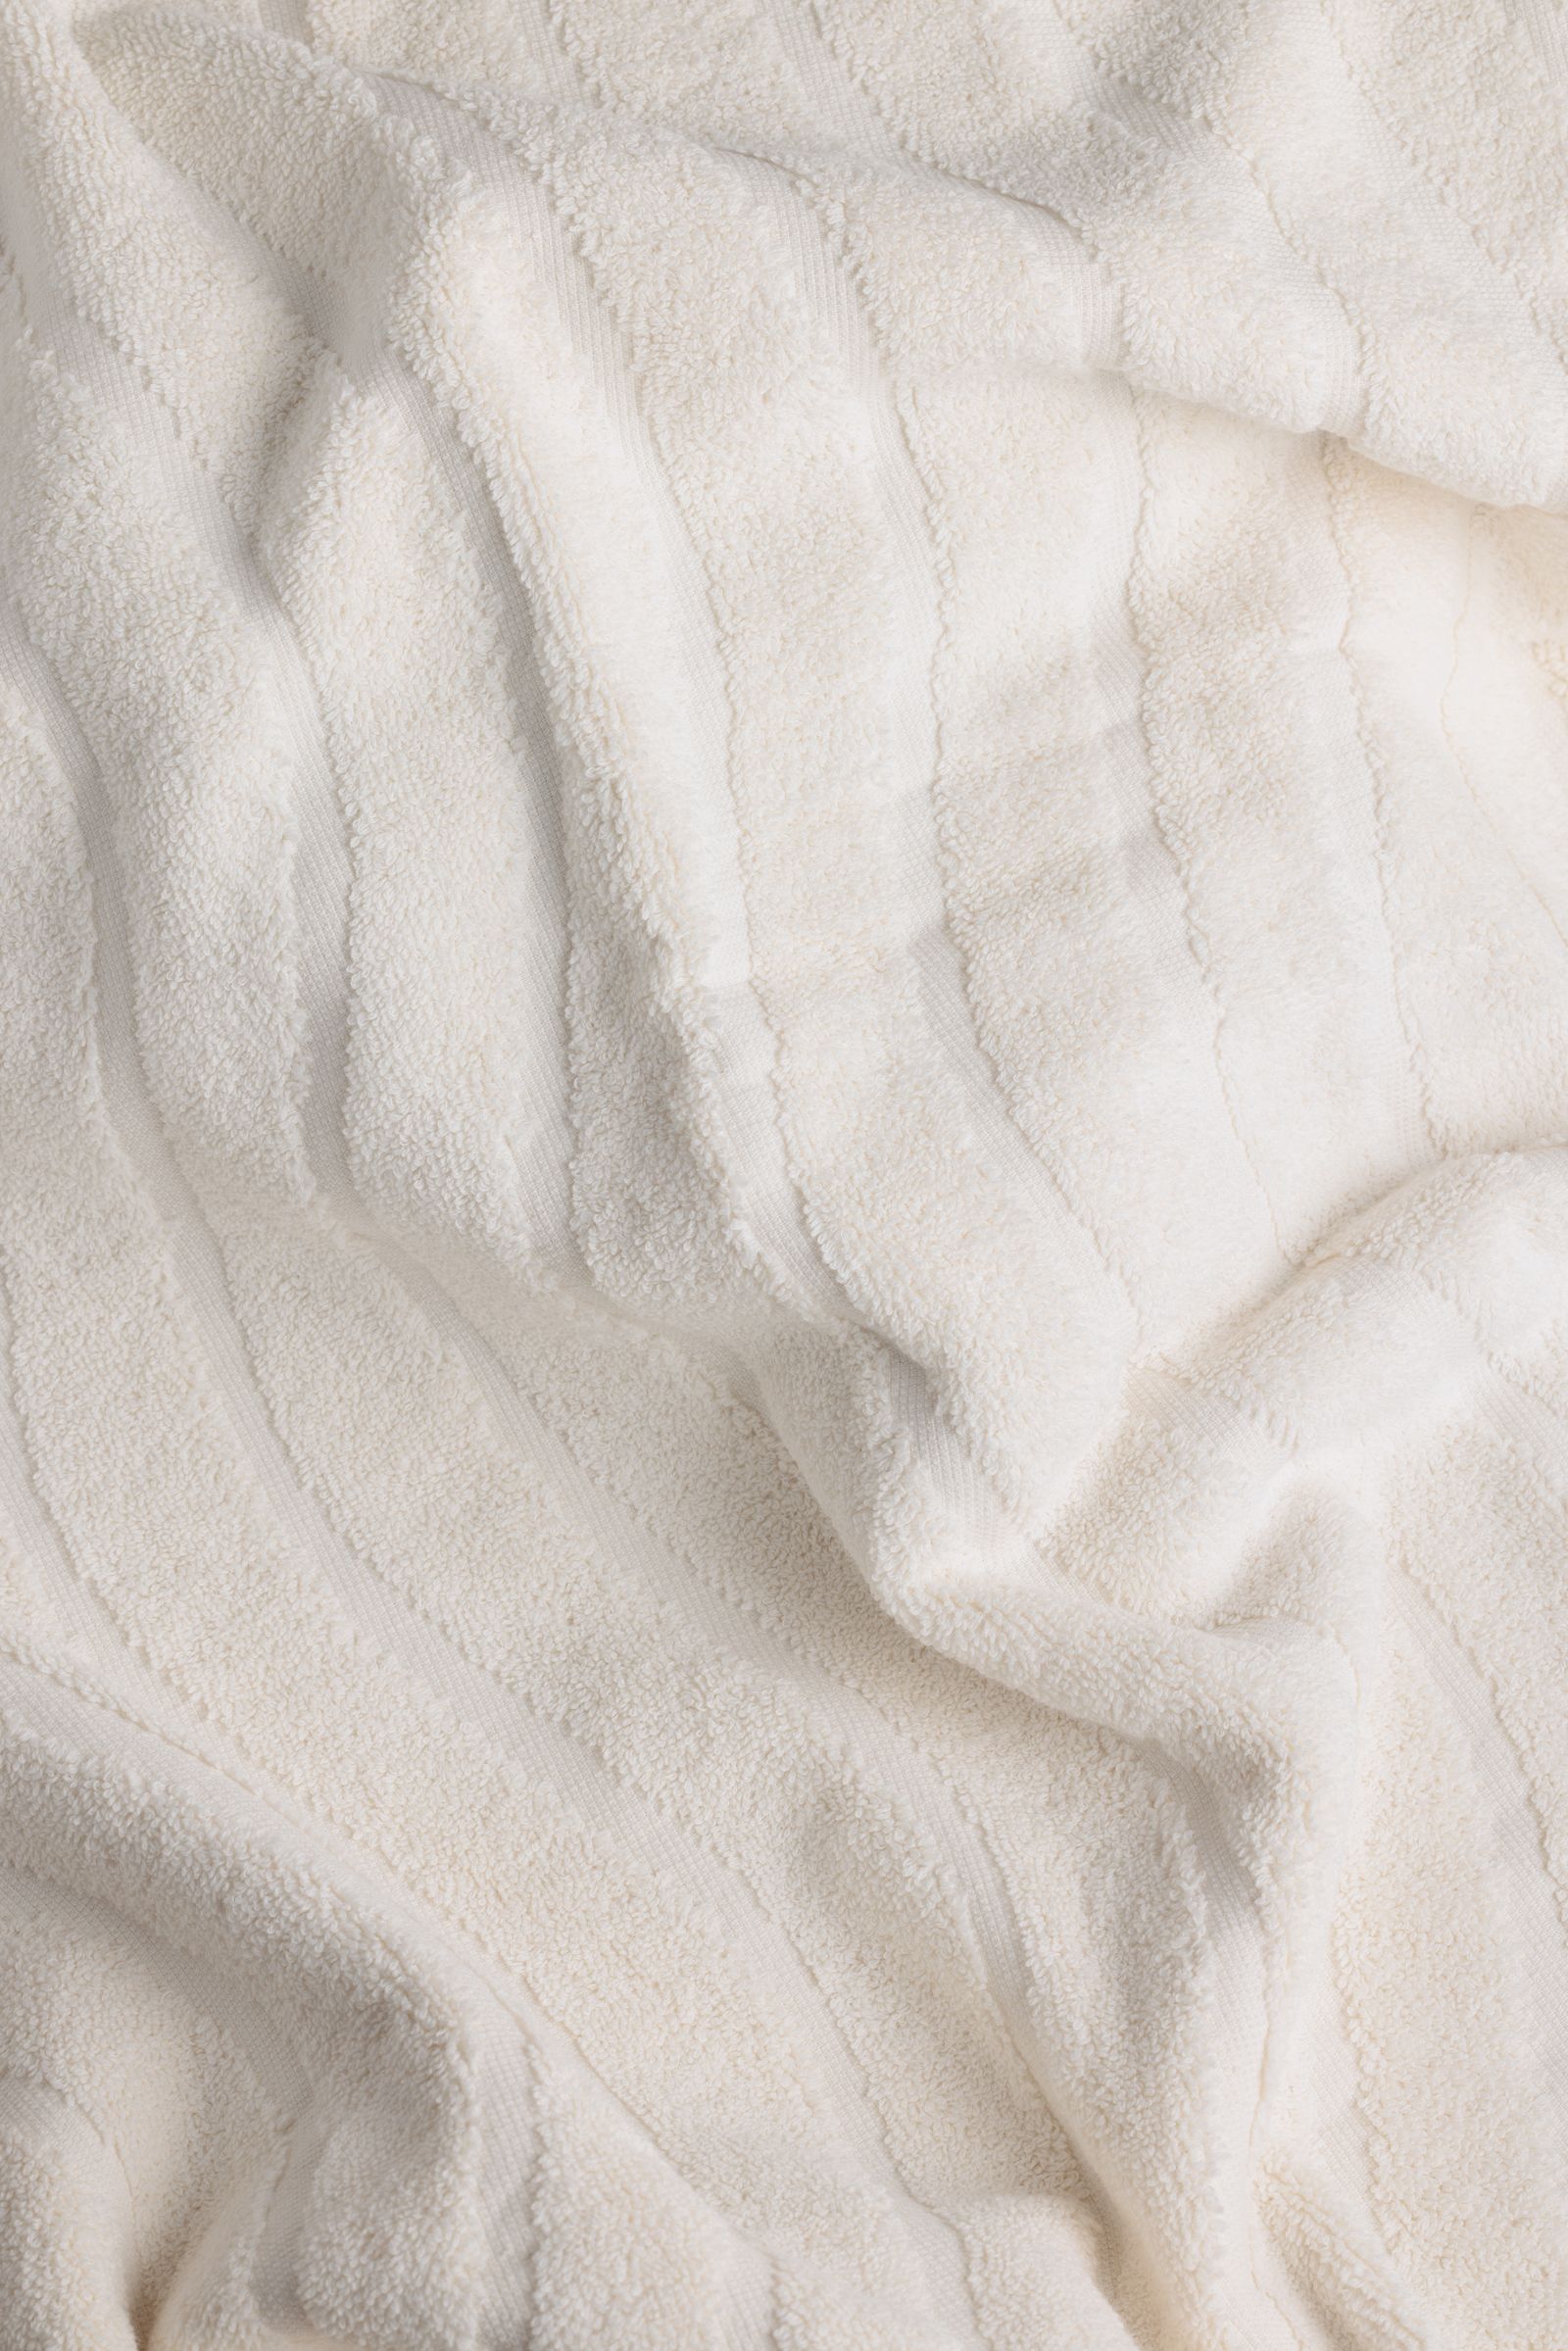 · Towel CLAIR off* | Join BAINA Store Shop Online for ST Cotton Organic BAINA Official | | Ivory 15% | Bath